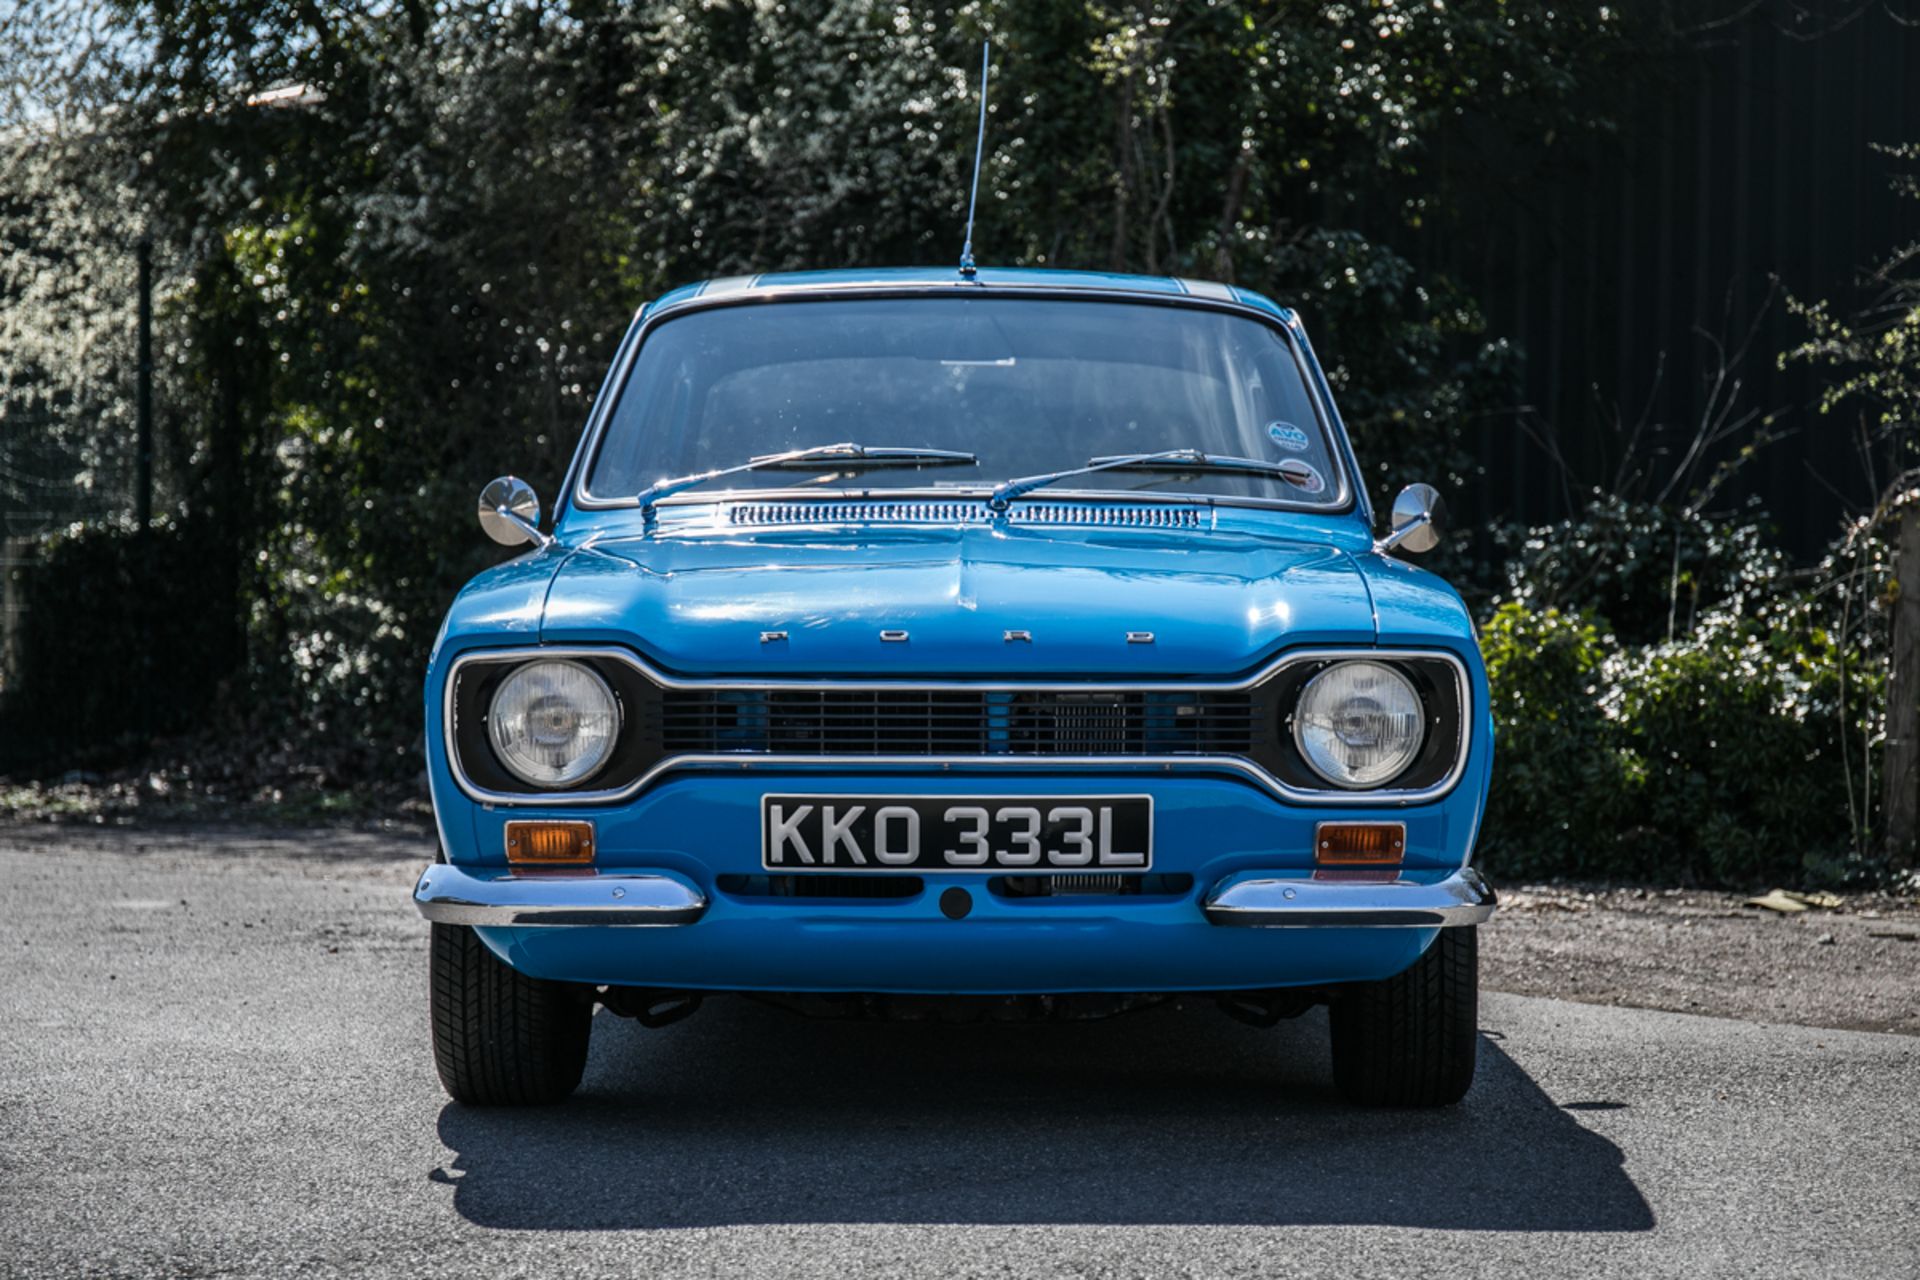 1973 Ford Escort 1600 Mexico - Image 2 of 20